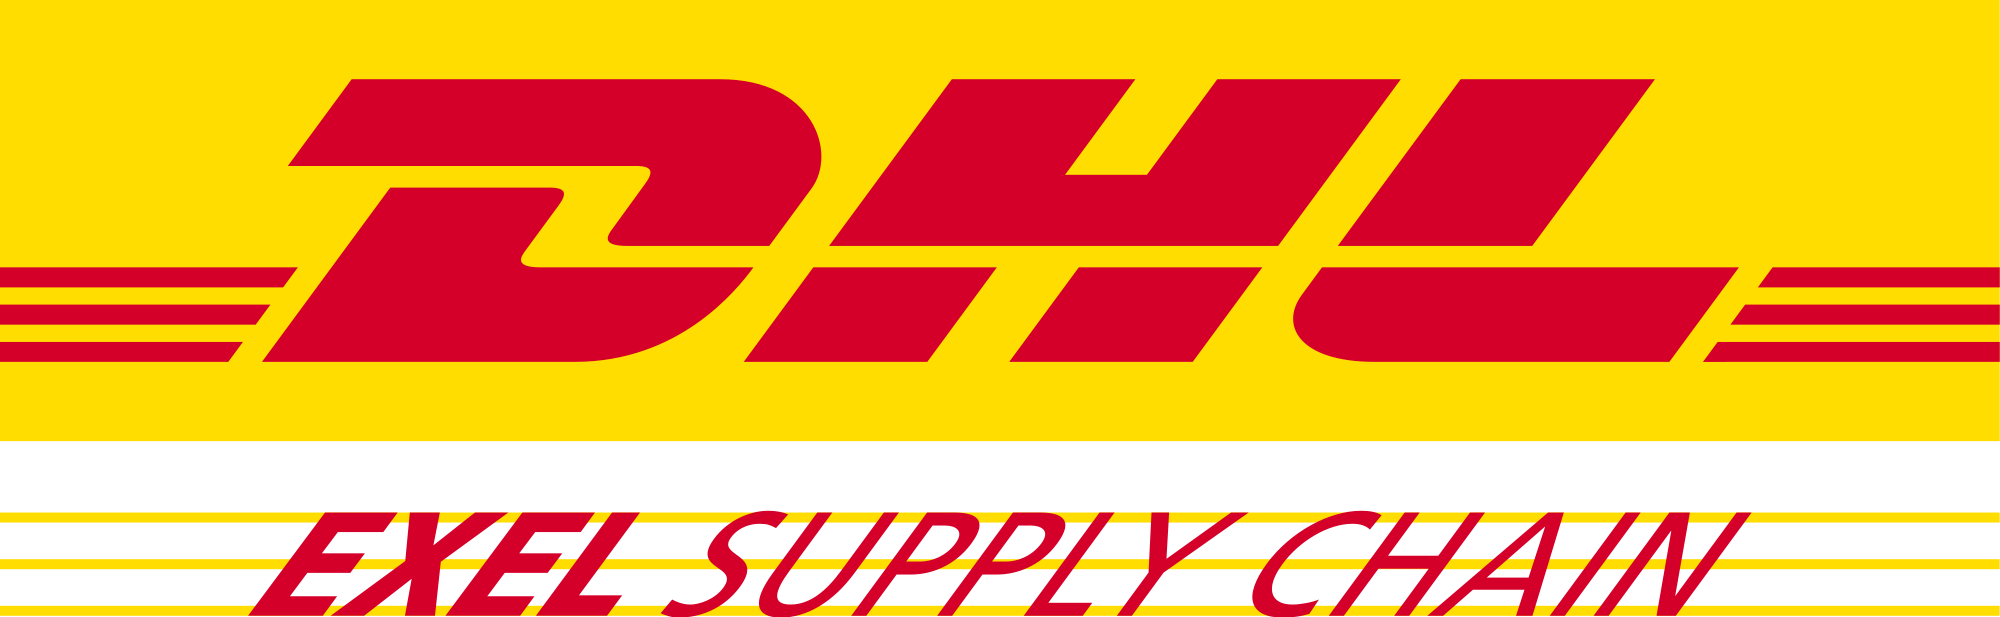 File Dhl Exel Supply Chain Svg Wikimedia Commons Rh - Dhl Exel Supply Chain (2000x617)